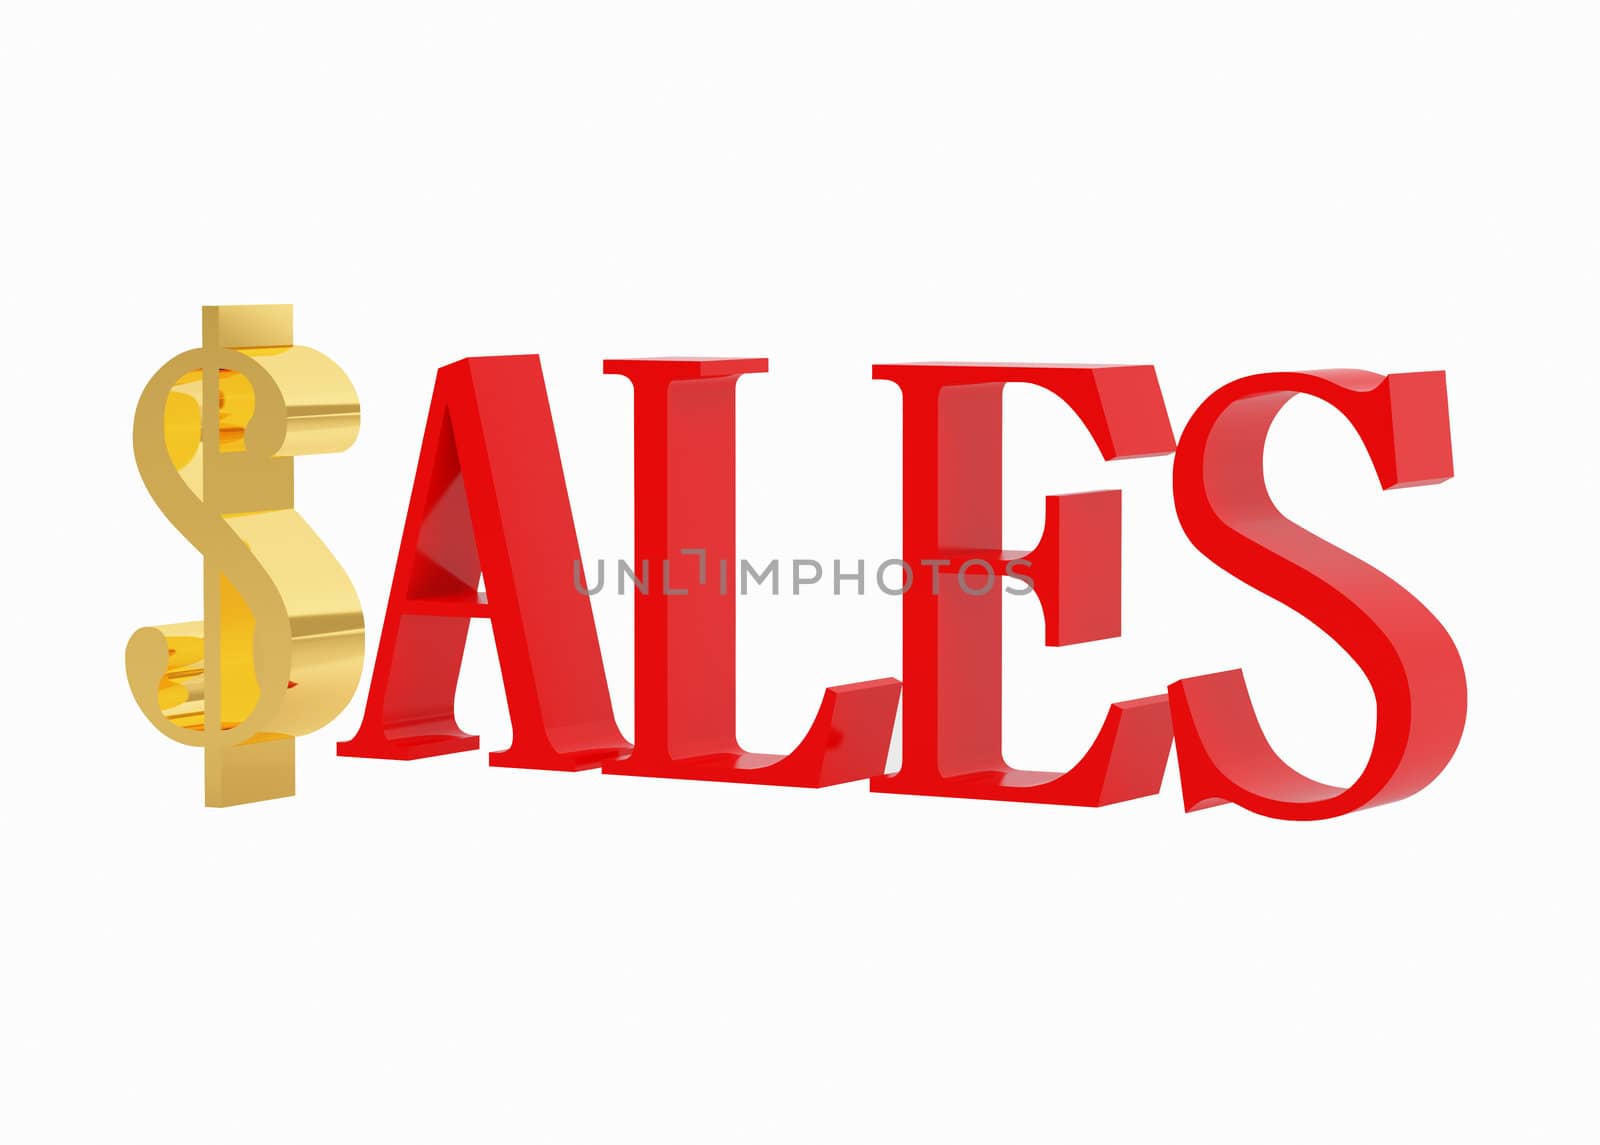 Red sale tag isolated on white. High resolution image.